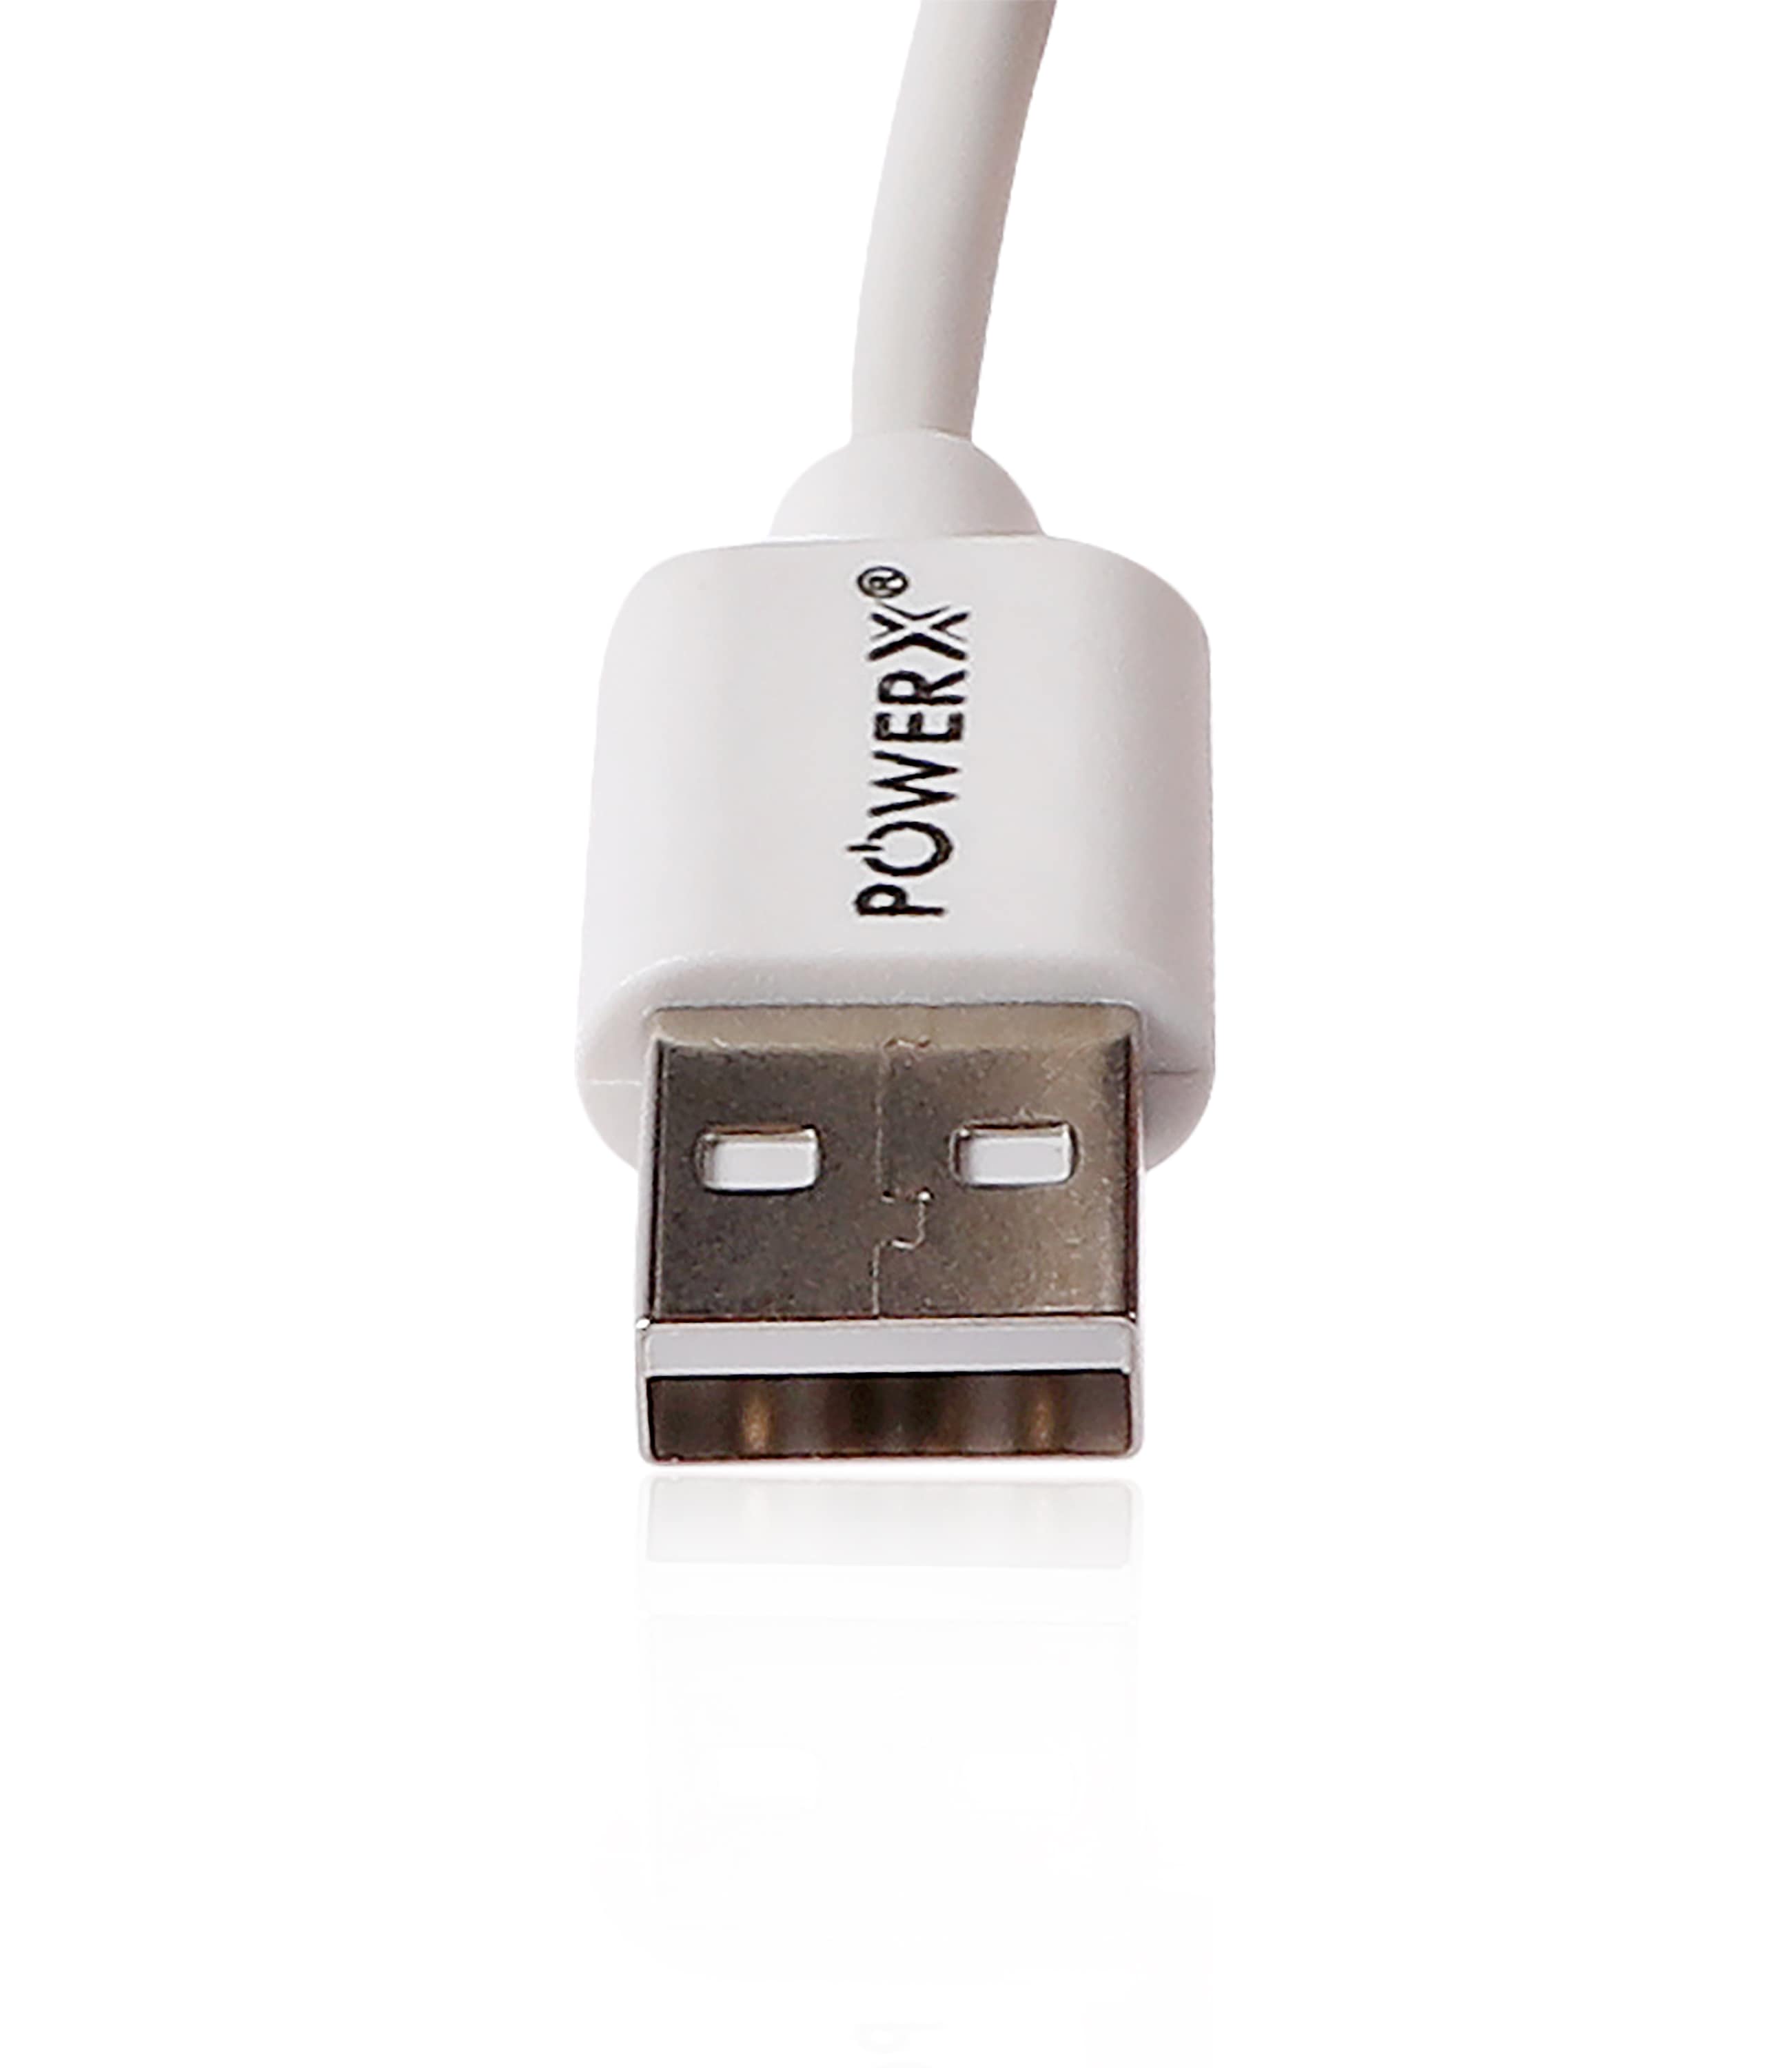 POWER X USB 2.0 A MALE TO A FEMALE CABLE 1.5 METER